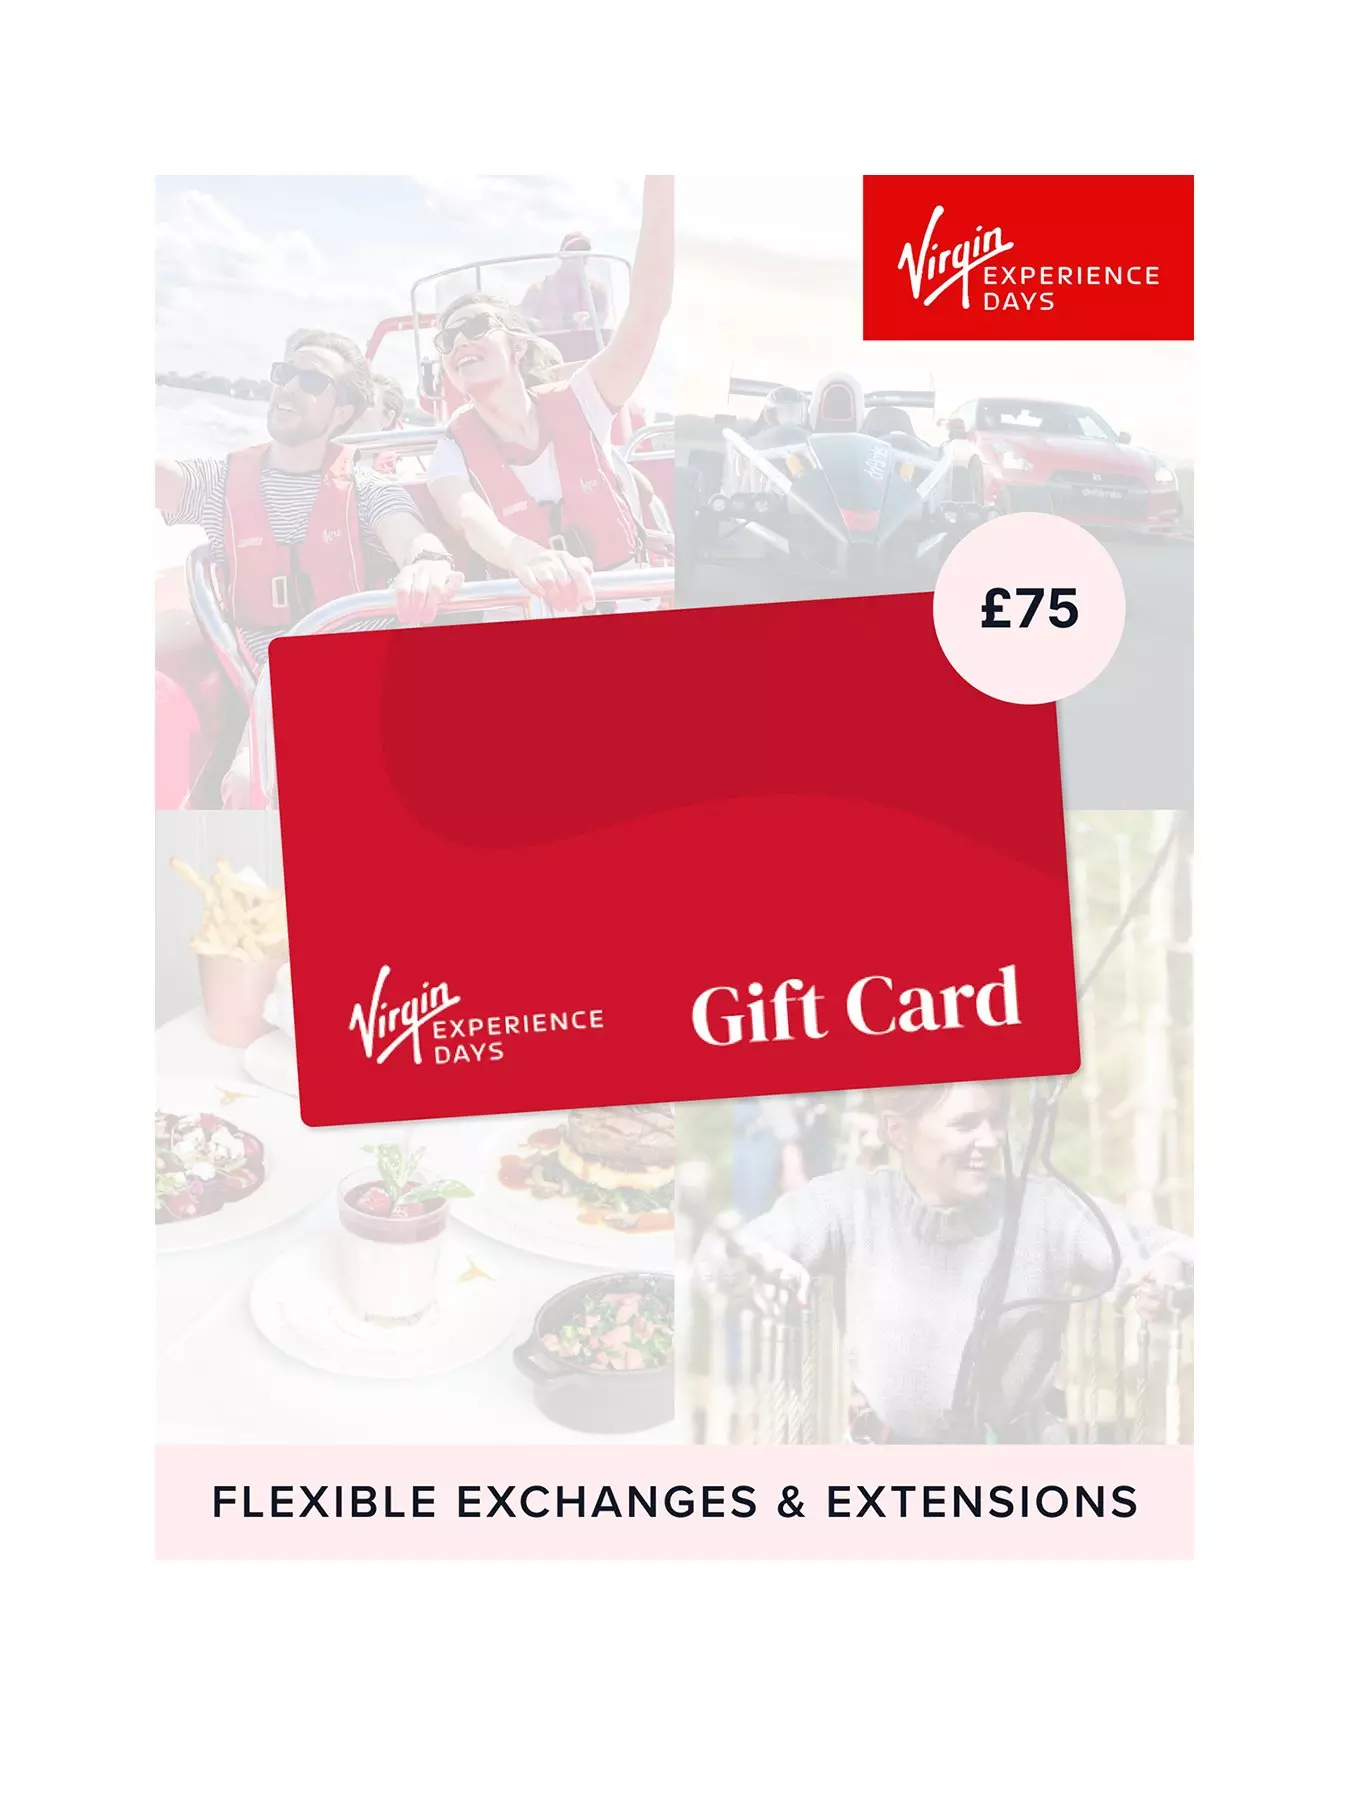 Experience Gift Cards & Vouchers - Virgin Experience Days